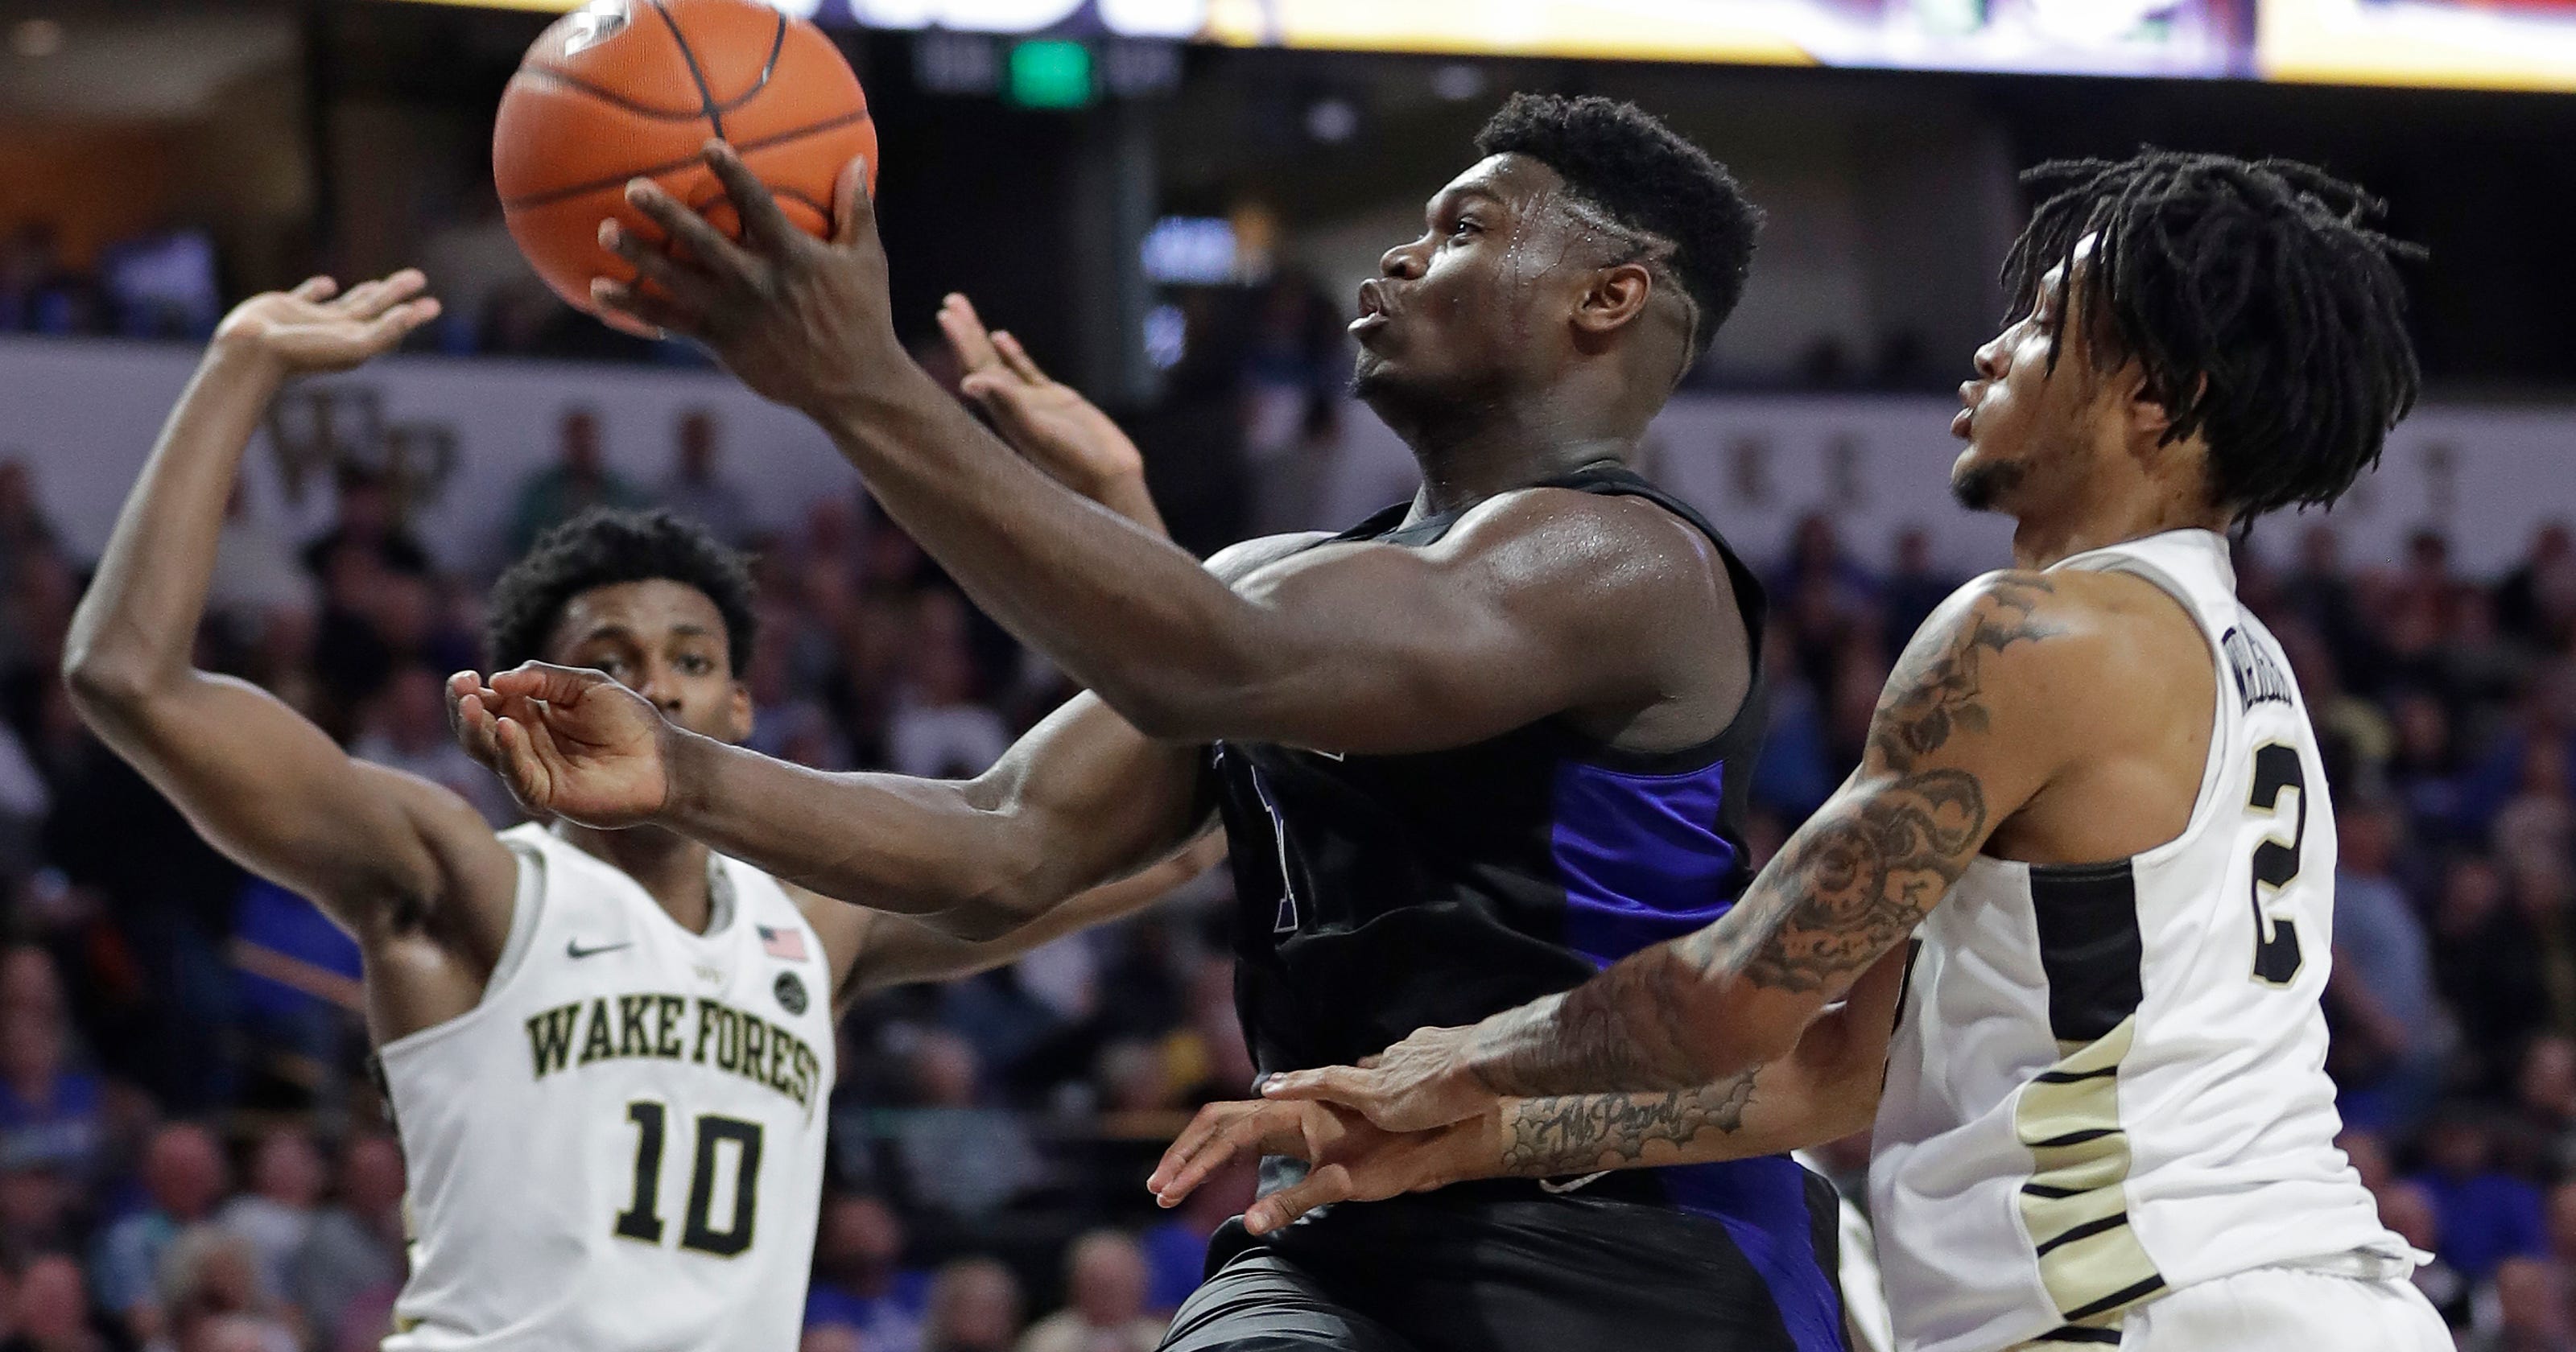 NBA Draft 2019: Looking at potential picks for the New York Knicks3200 x 1680